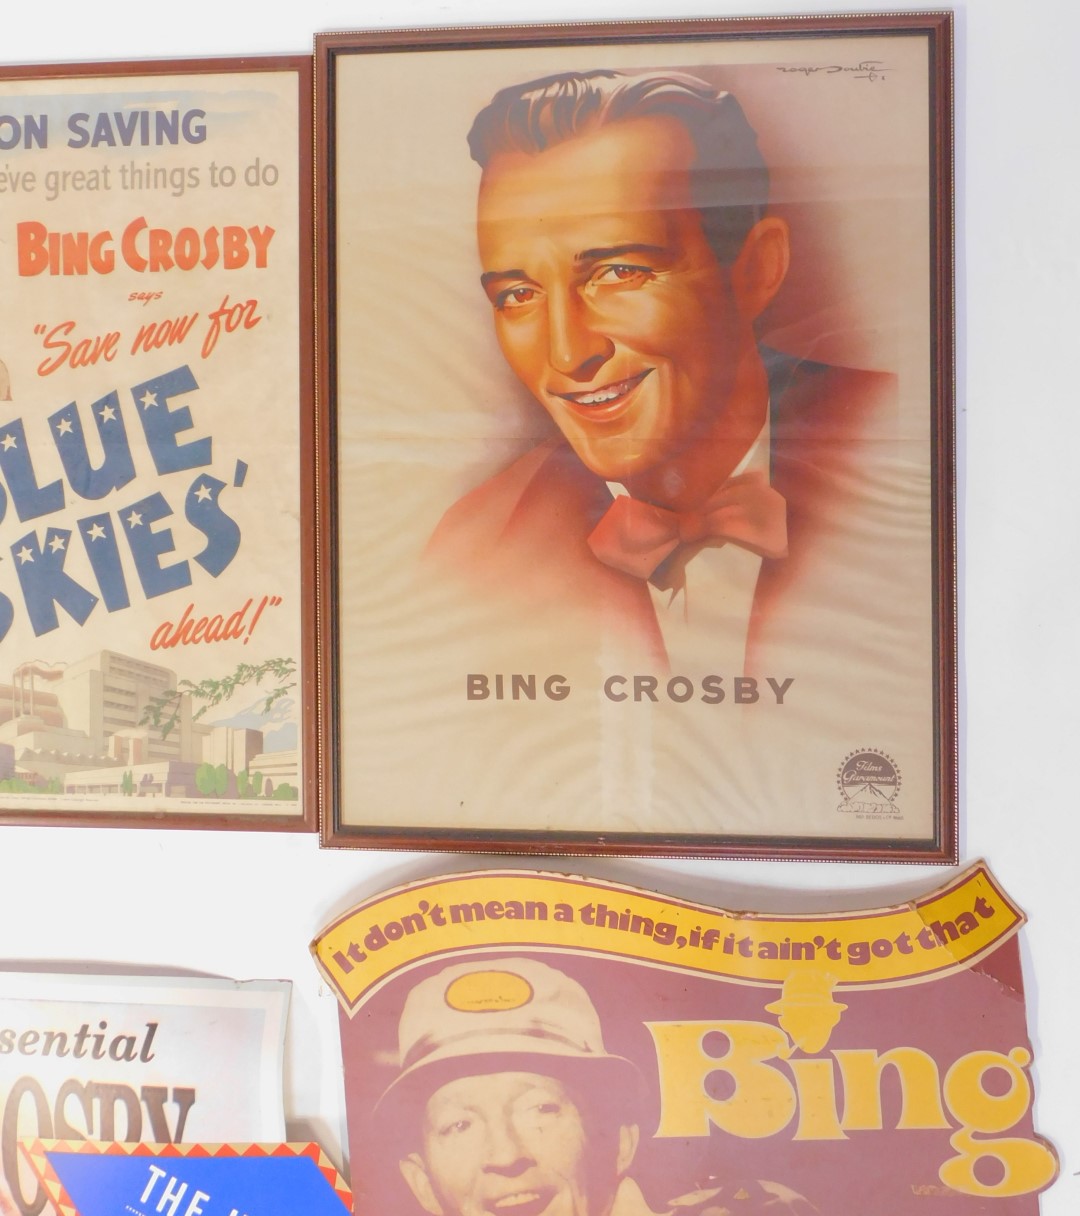 A collection of Bing Crosby posters, to include advertising 'Keep on Saving We've Great Things to do - Image 6 of 6